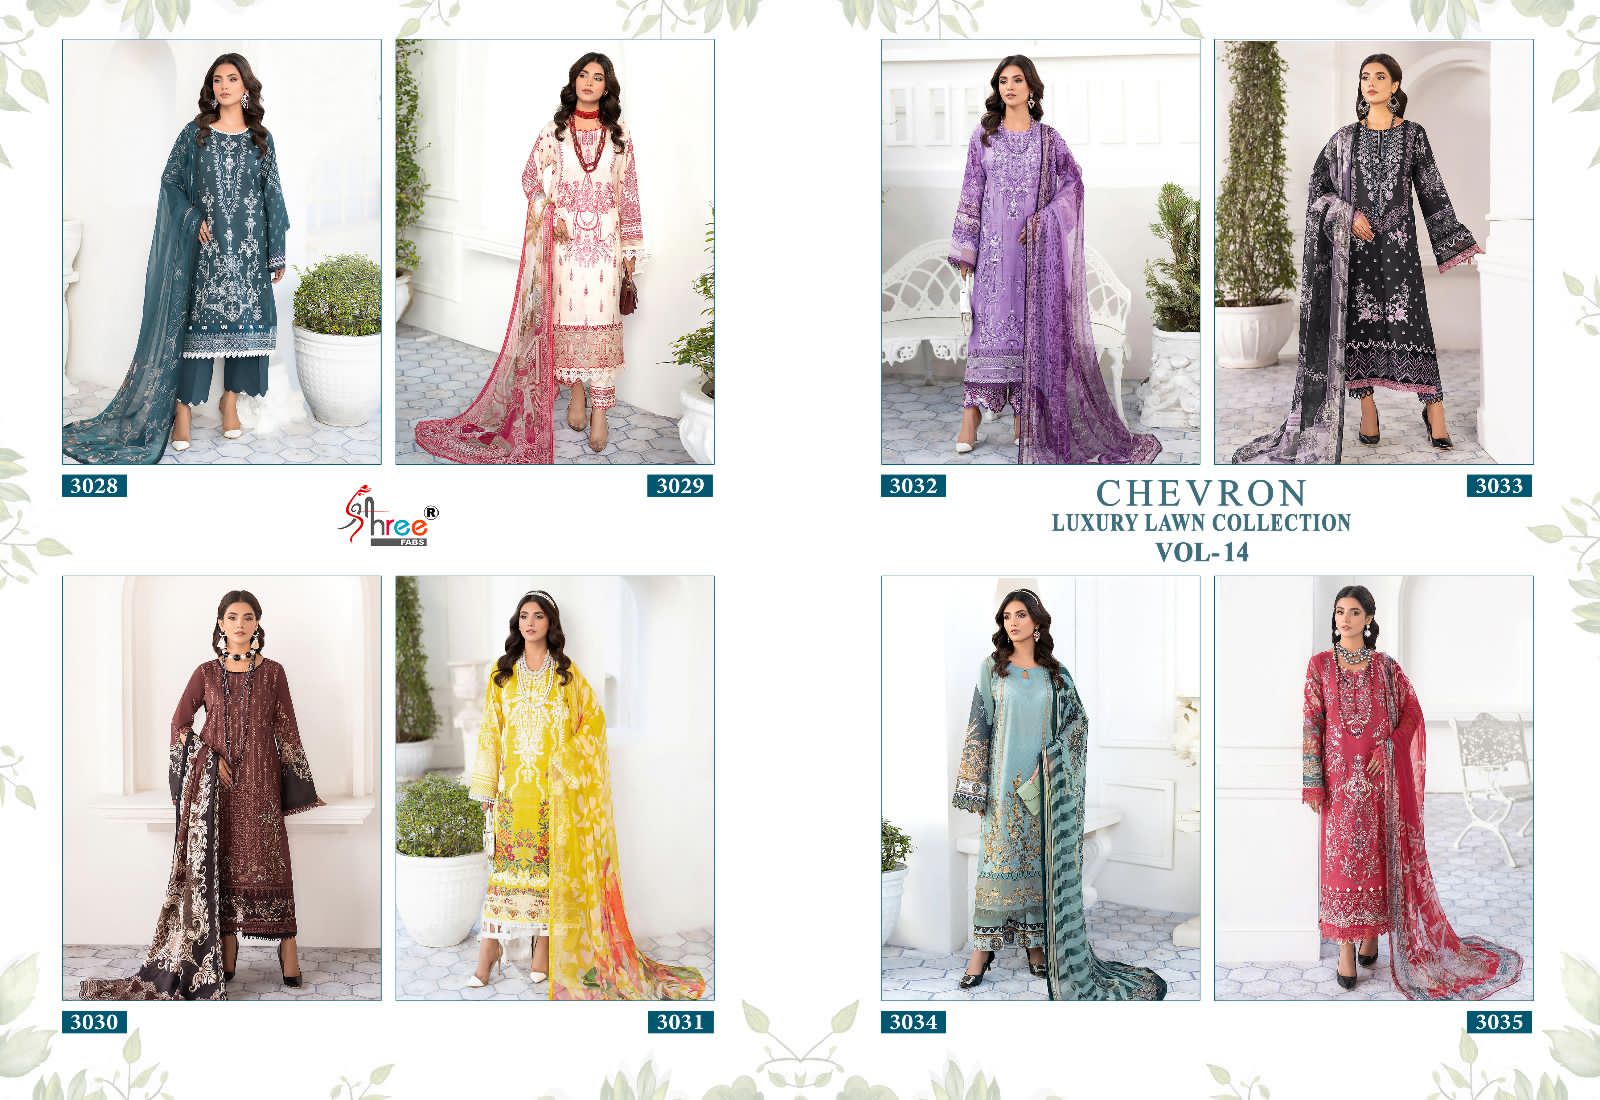 Shree Chevron Luxury Lawn Collection Vol 14 collection 6